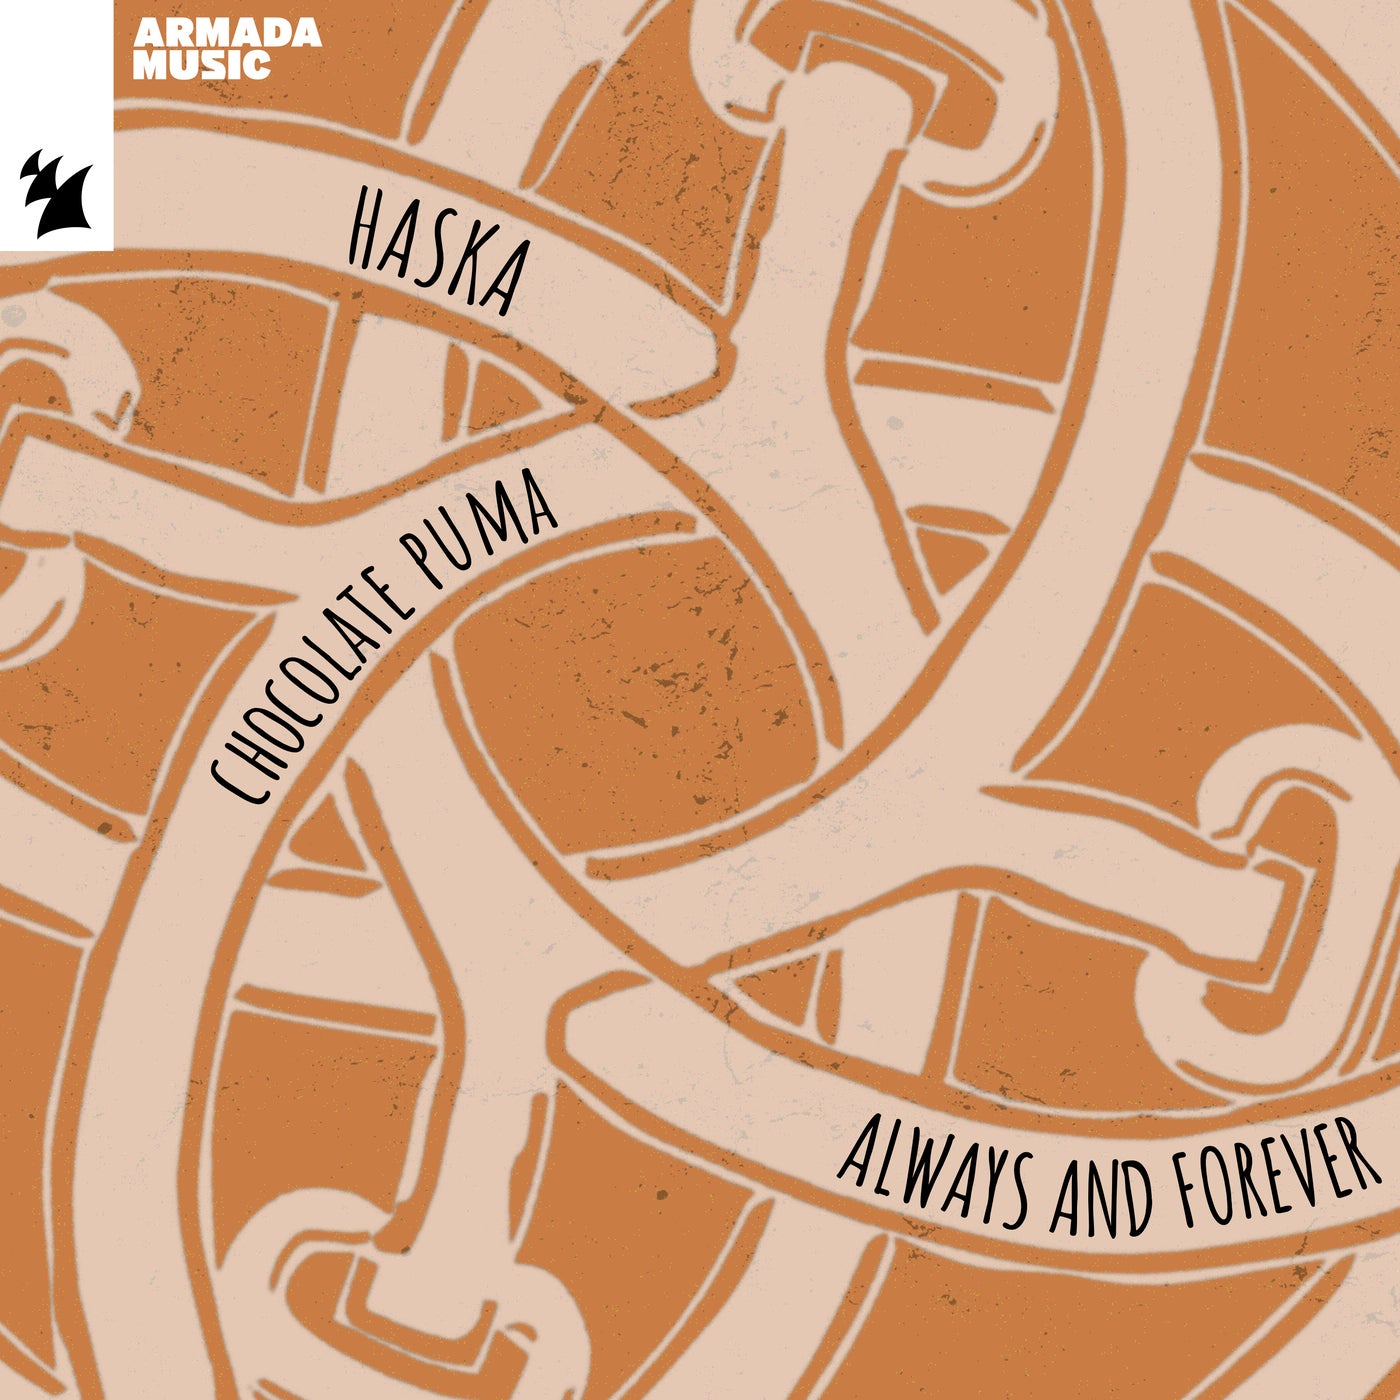 image cover: Chocolate Puma, Haska - Always And Forever on Armada Music